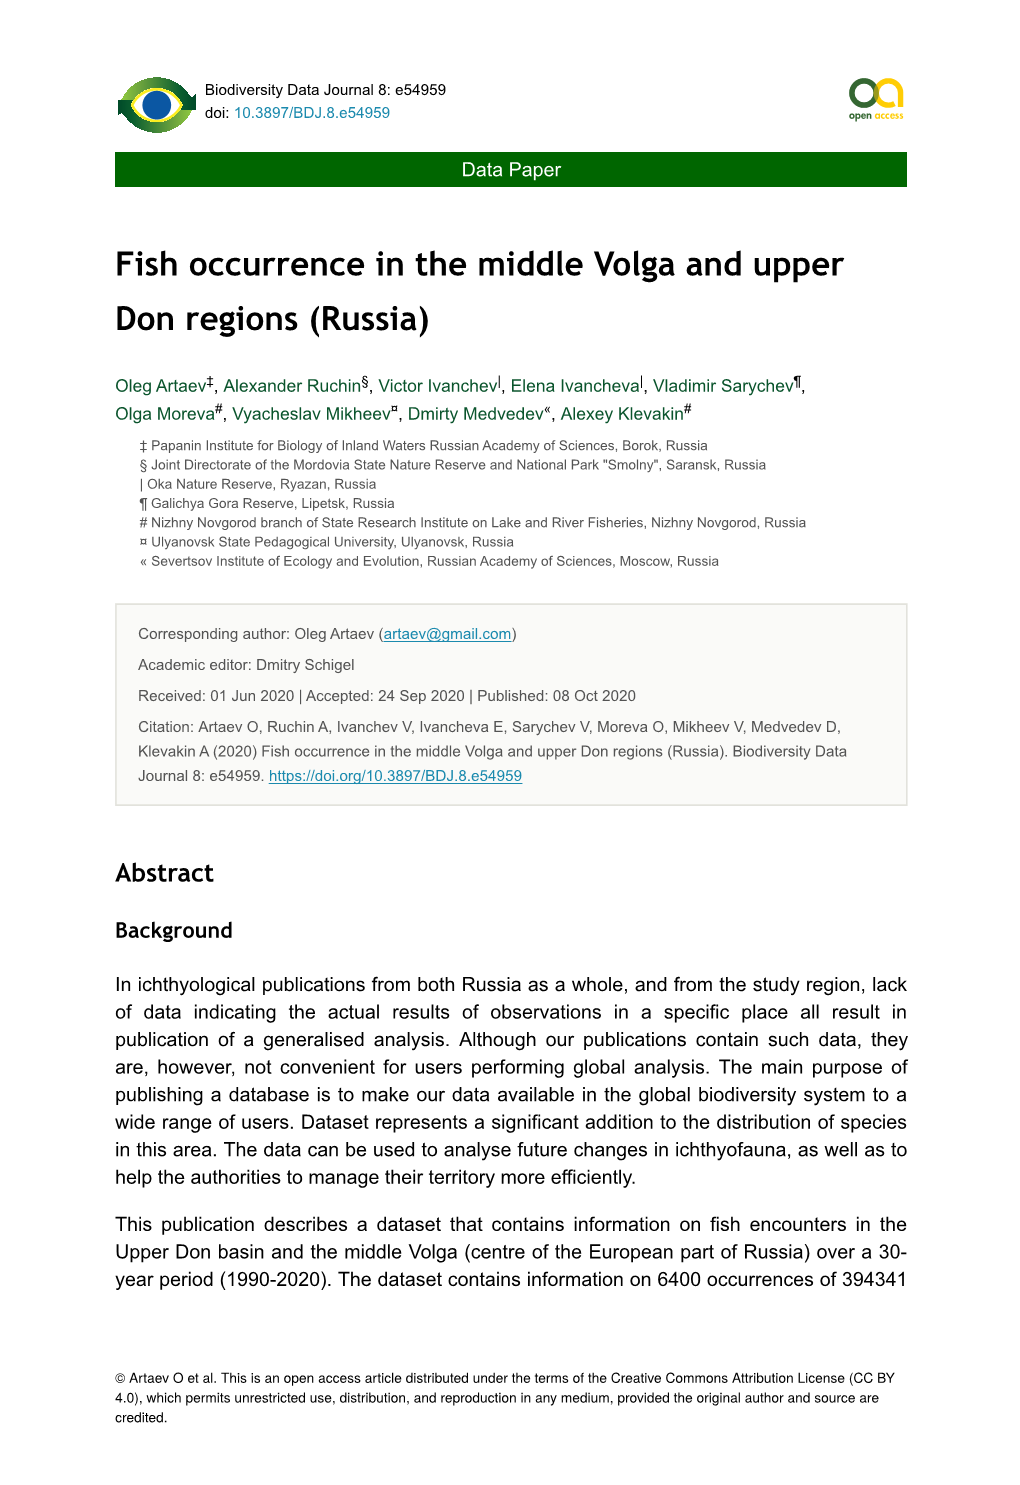 Fish Occurrence in the Middle Volga and Upper Don Regions (Russia)